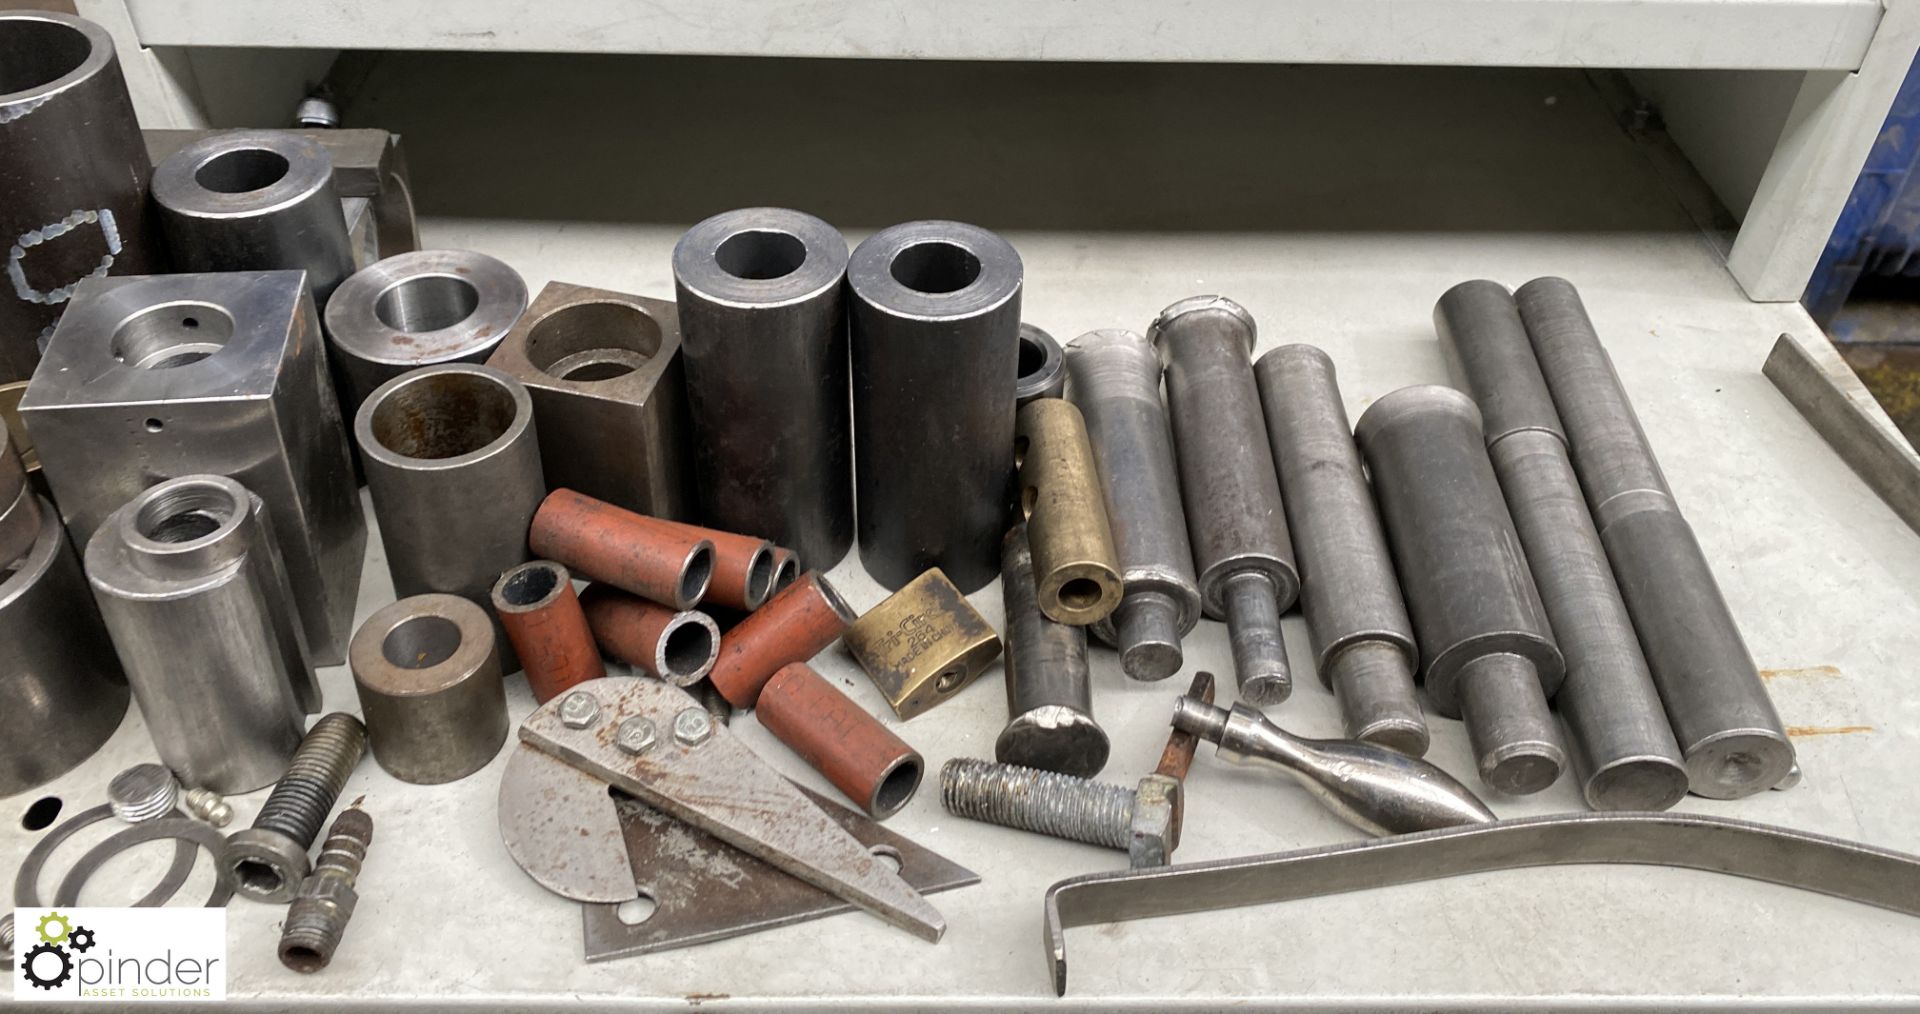 Quantity various Spacer Bars, Tool Holders, Collars, 2 Workbenches, Cabinet and 6in Engineers Vice - Image 9 of 10